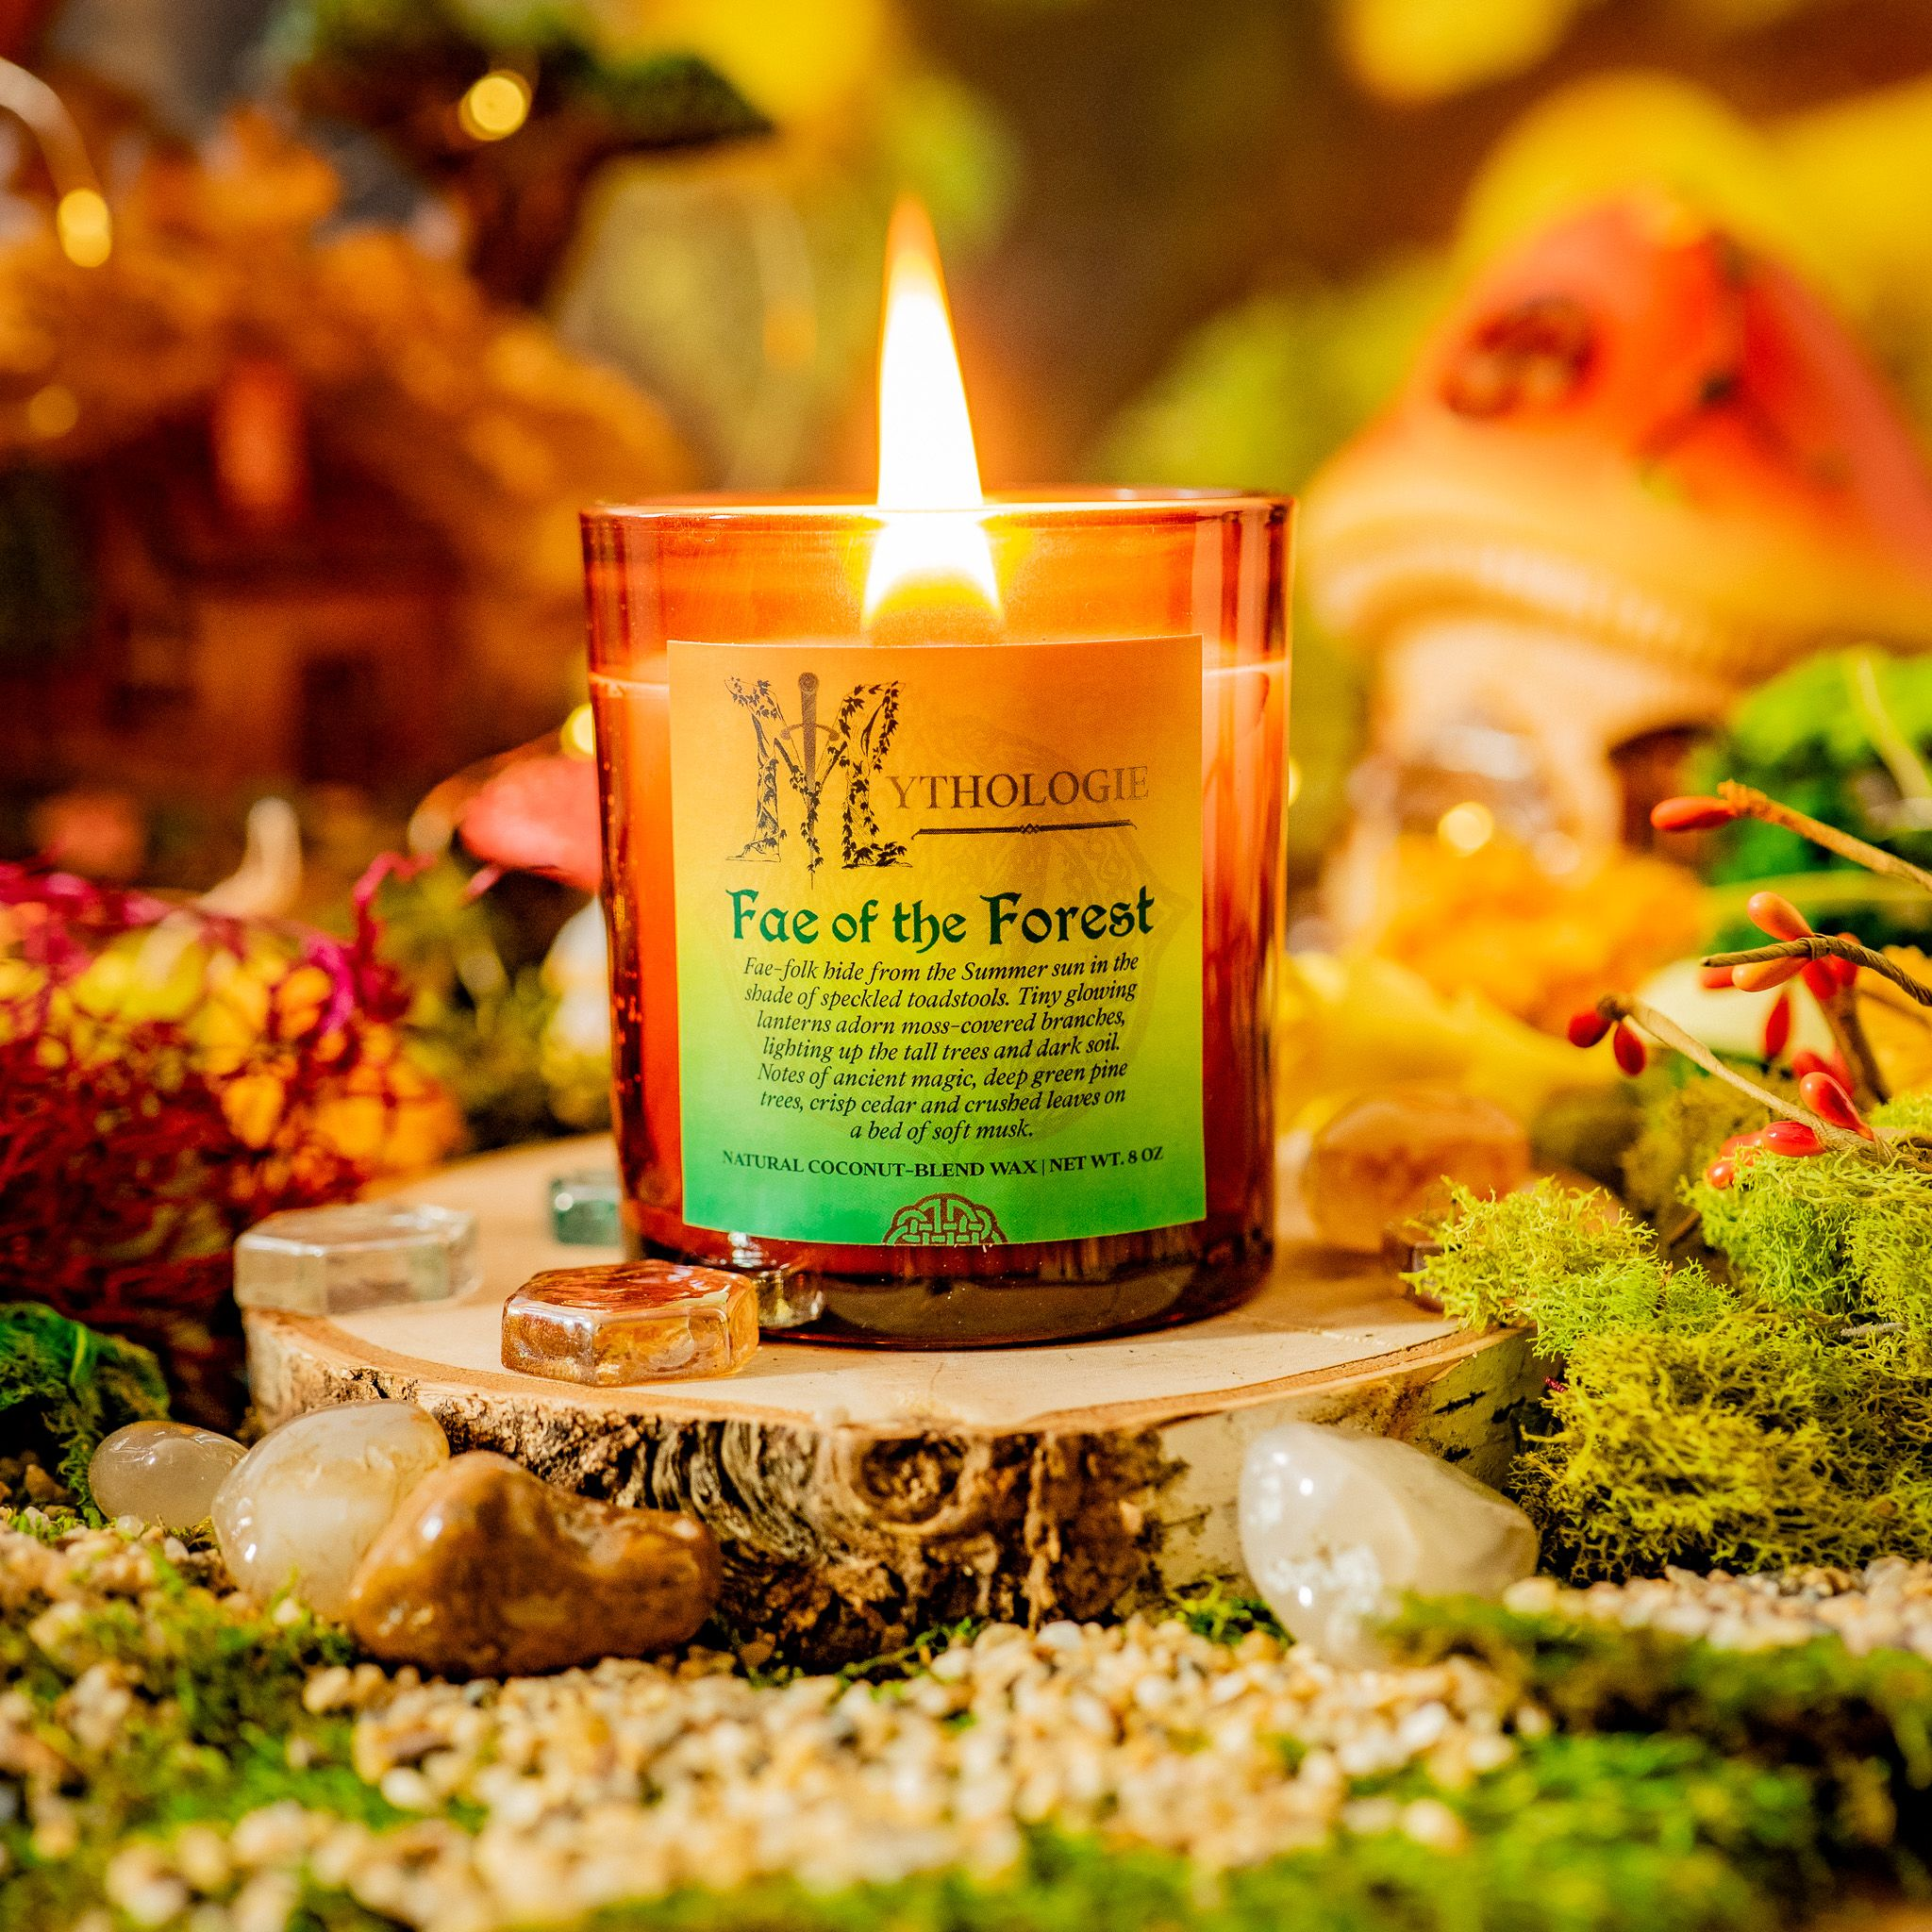 Ancient magic, deep green pine trees, crisp cedar and crushed leaves on a bed of soft musk.